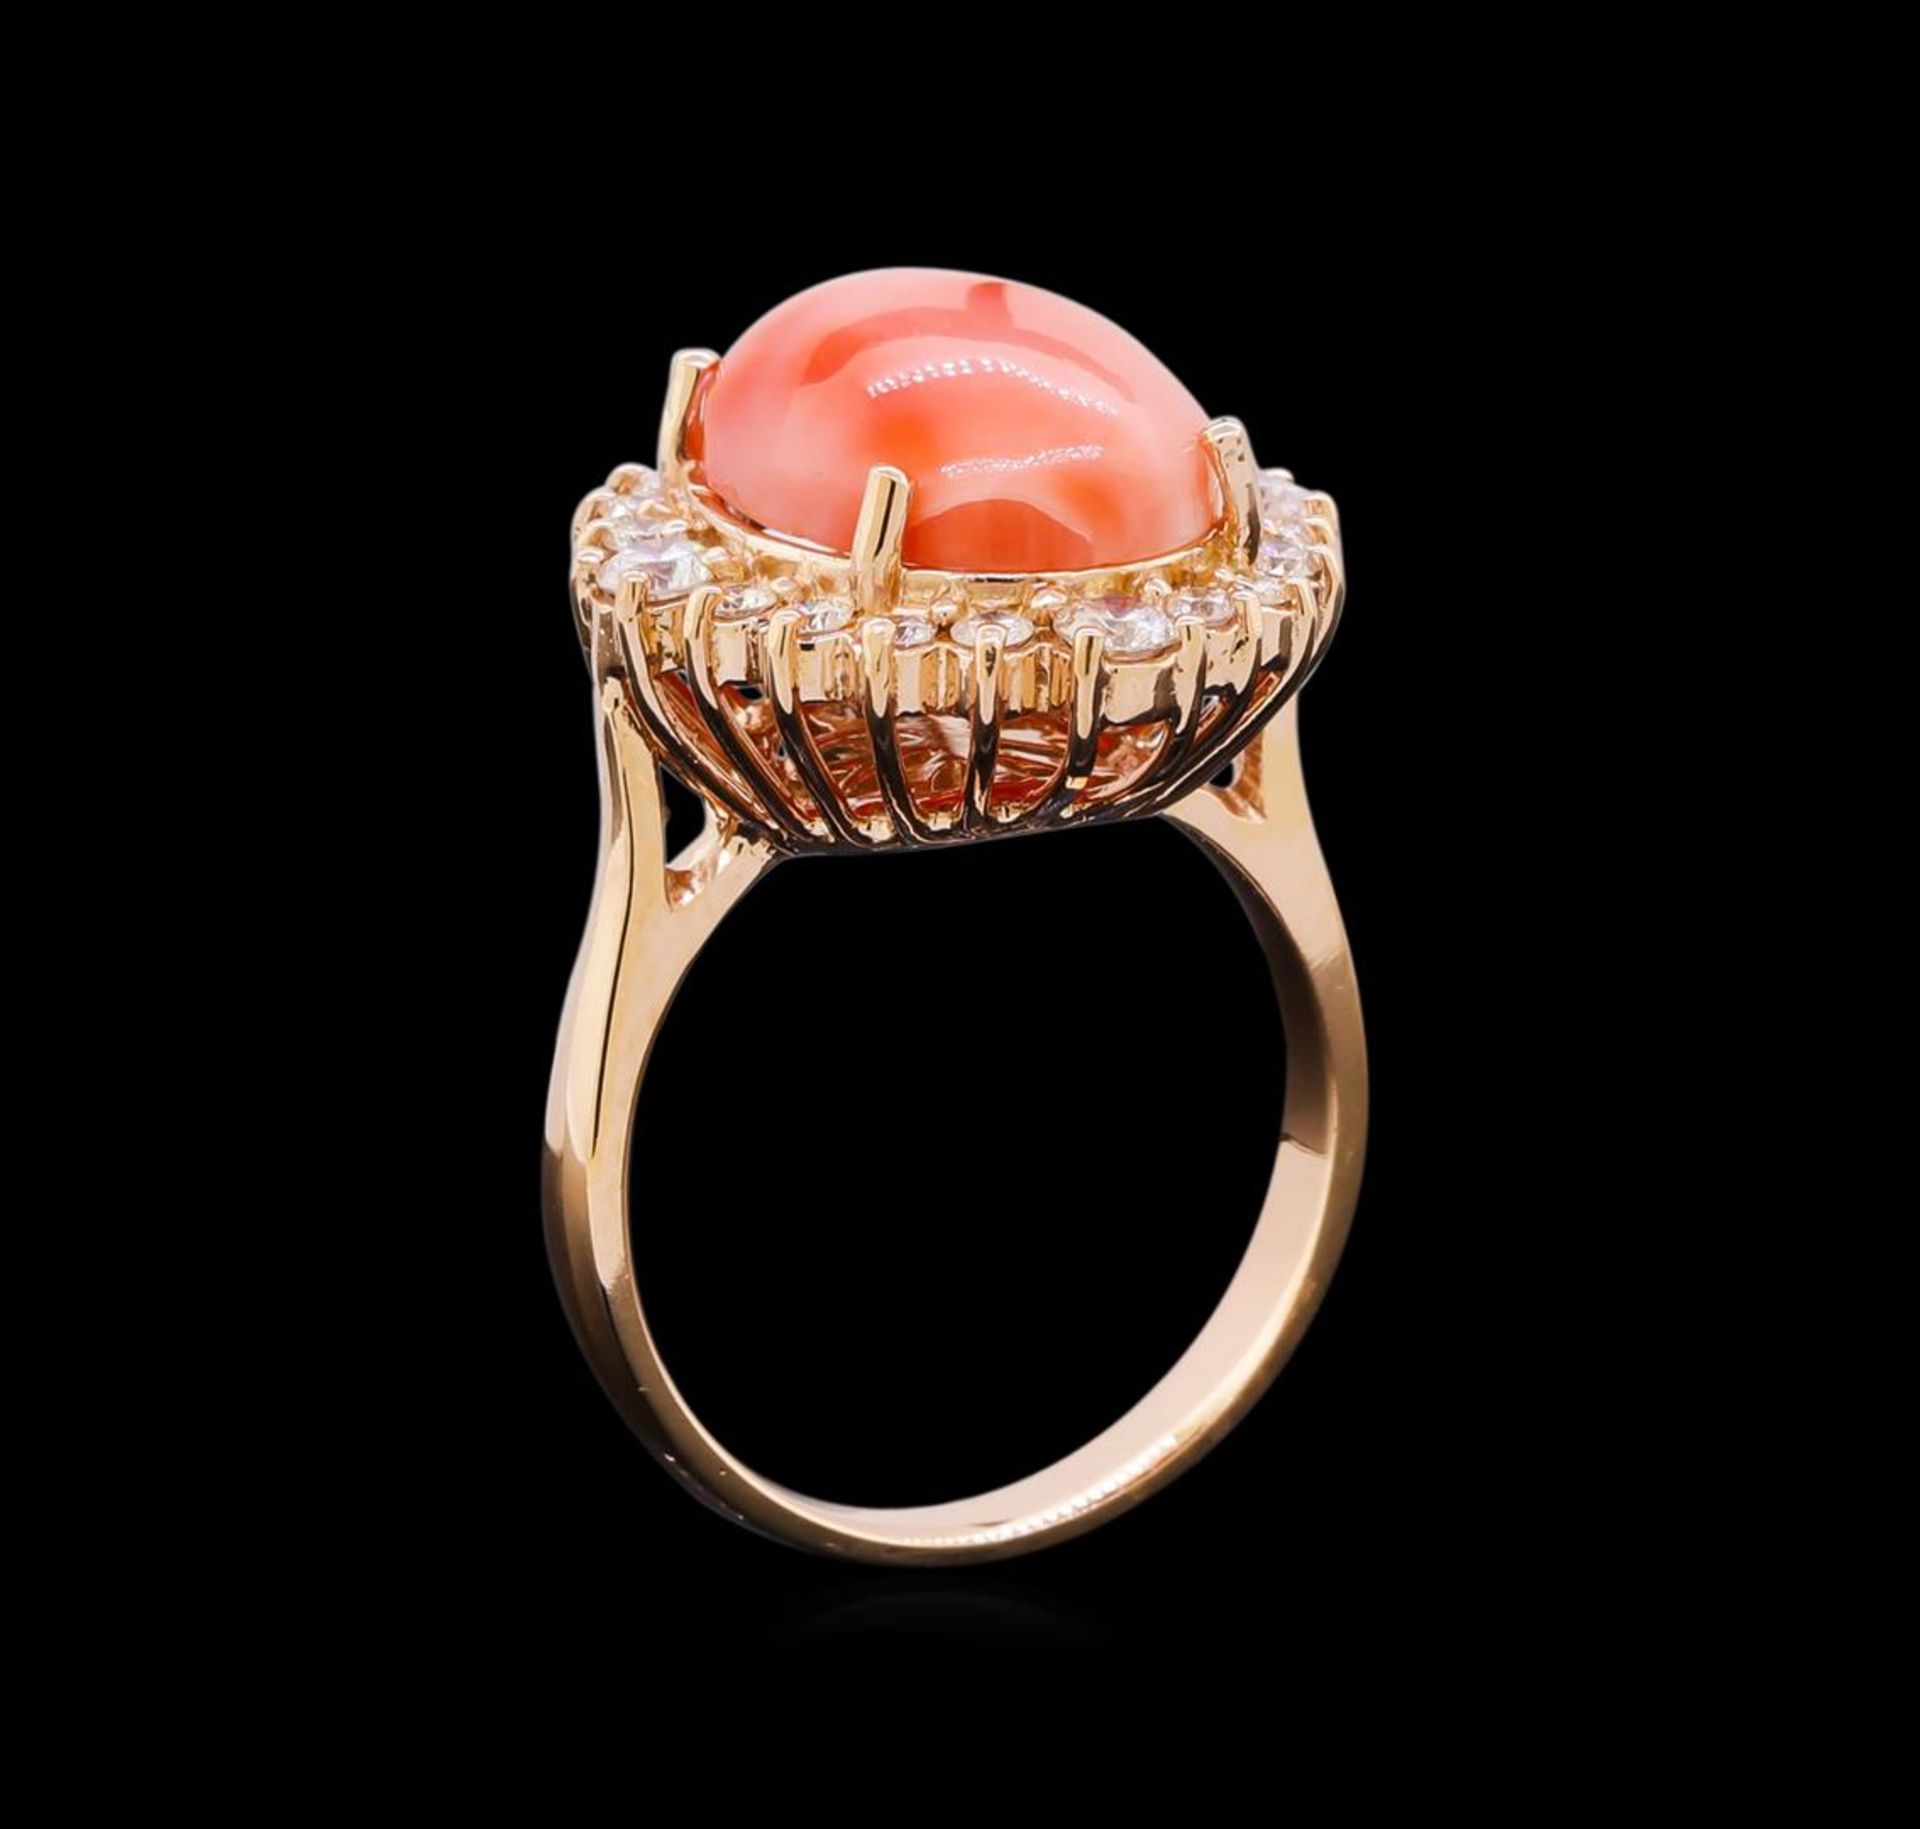 8.10 ctw Pink Coral and Diamond Ring - 14KT Rose Gold - Image 4 of 5